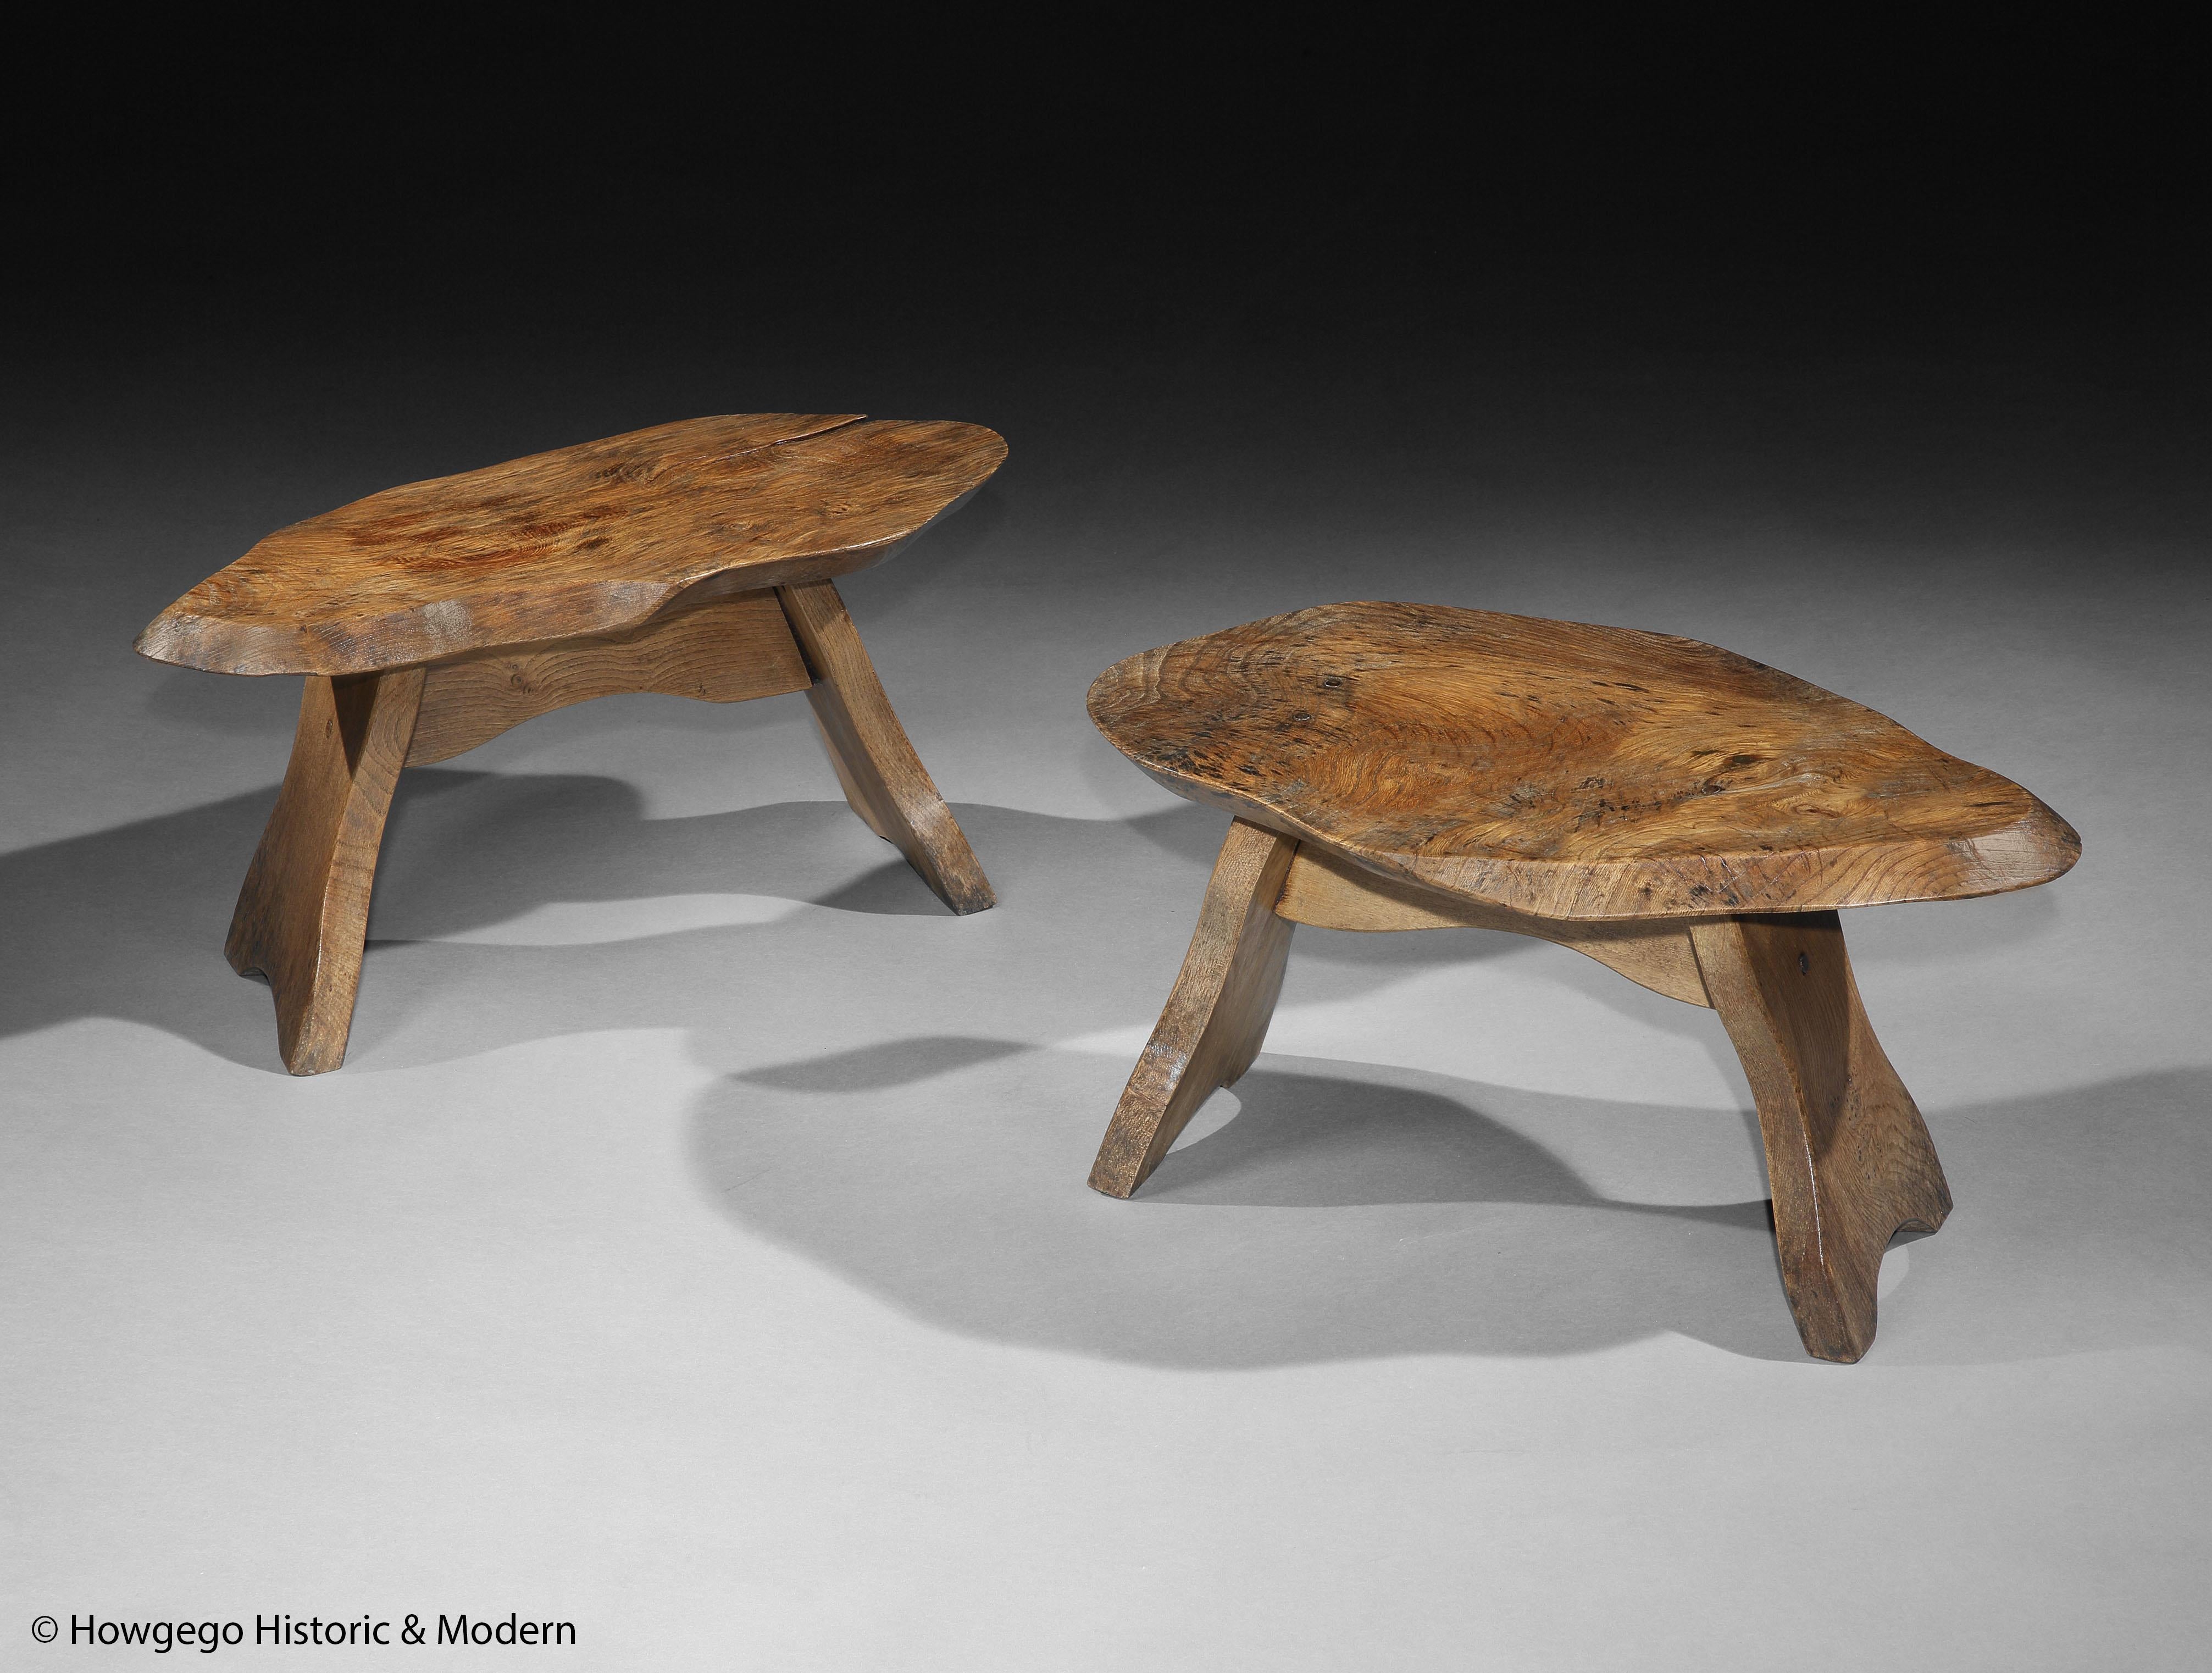 Sculptural tables using the natural characteristics and form of the elm as the inspiration to create furniture that transcends purpose into organic art.
The patina and wear that have developed with time add to the raw, organic character of these